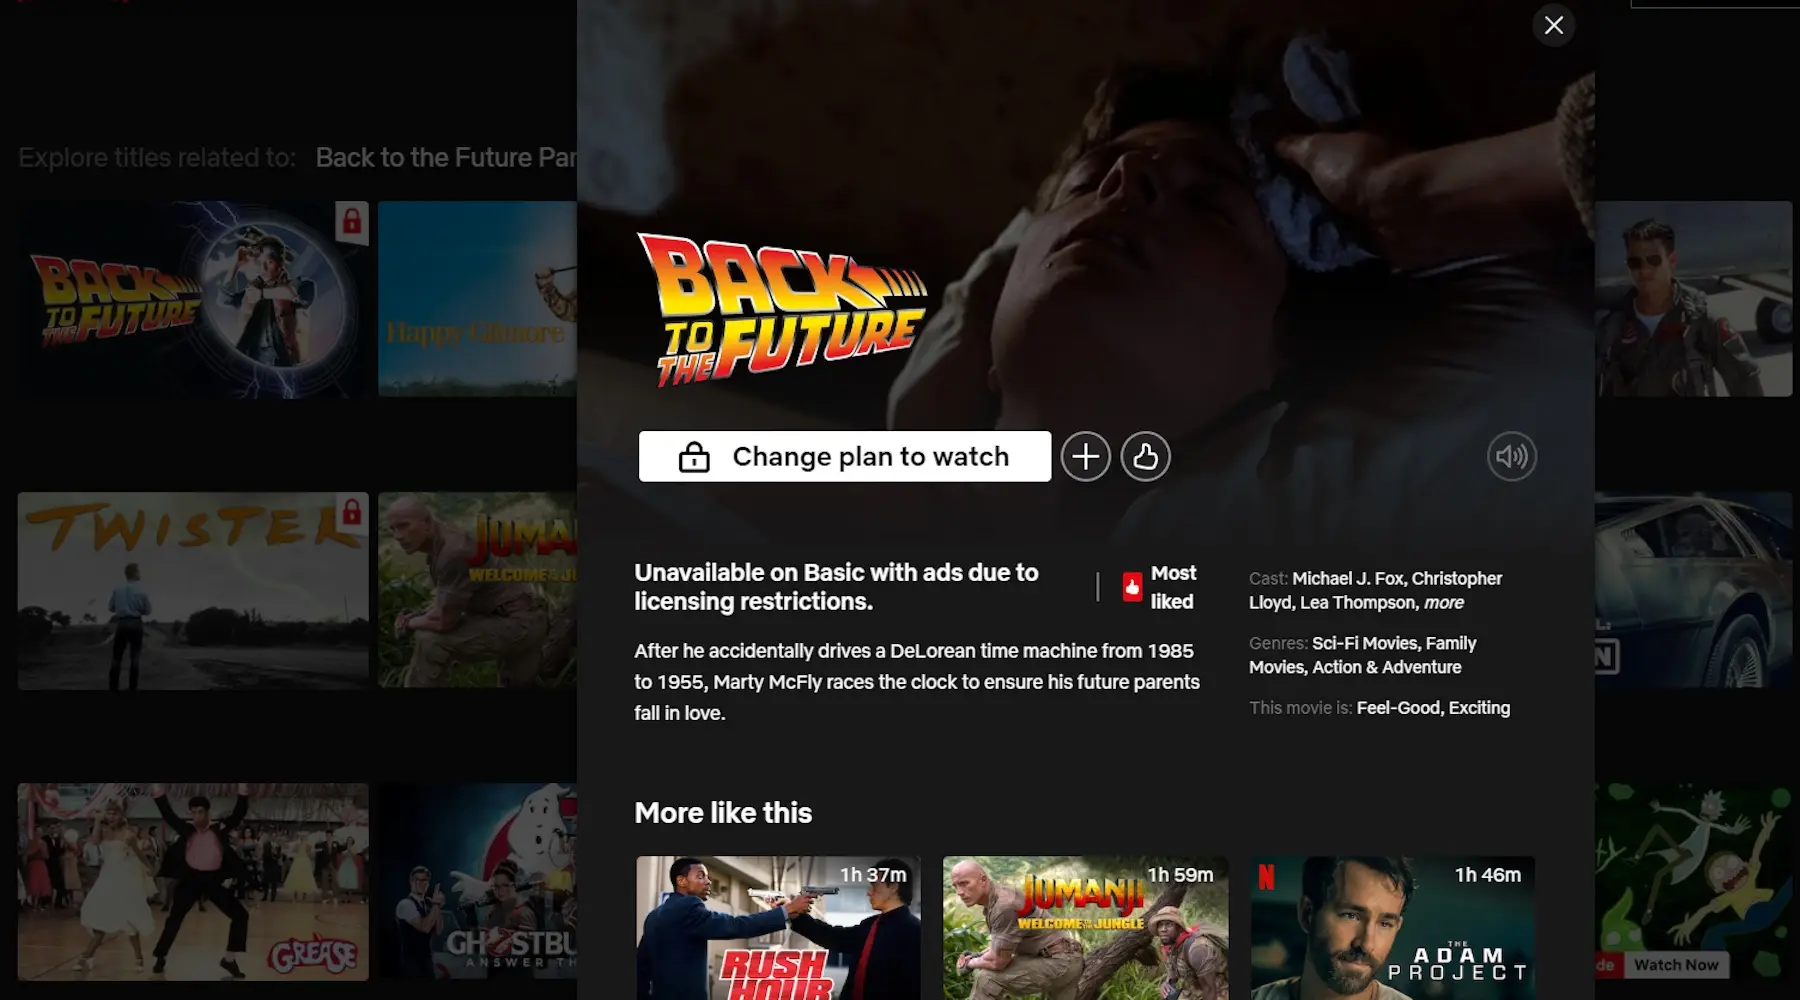 Back to the Future tile on Netflix, with a message showing it's unavailable to watch on the Basic with Ads plan